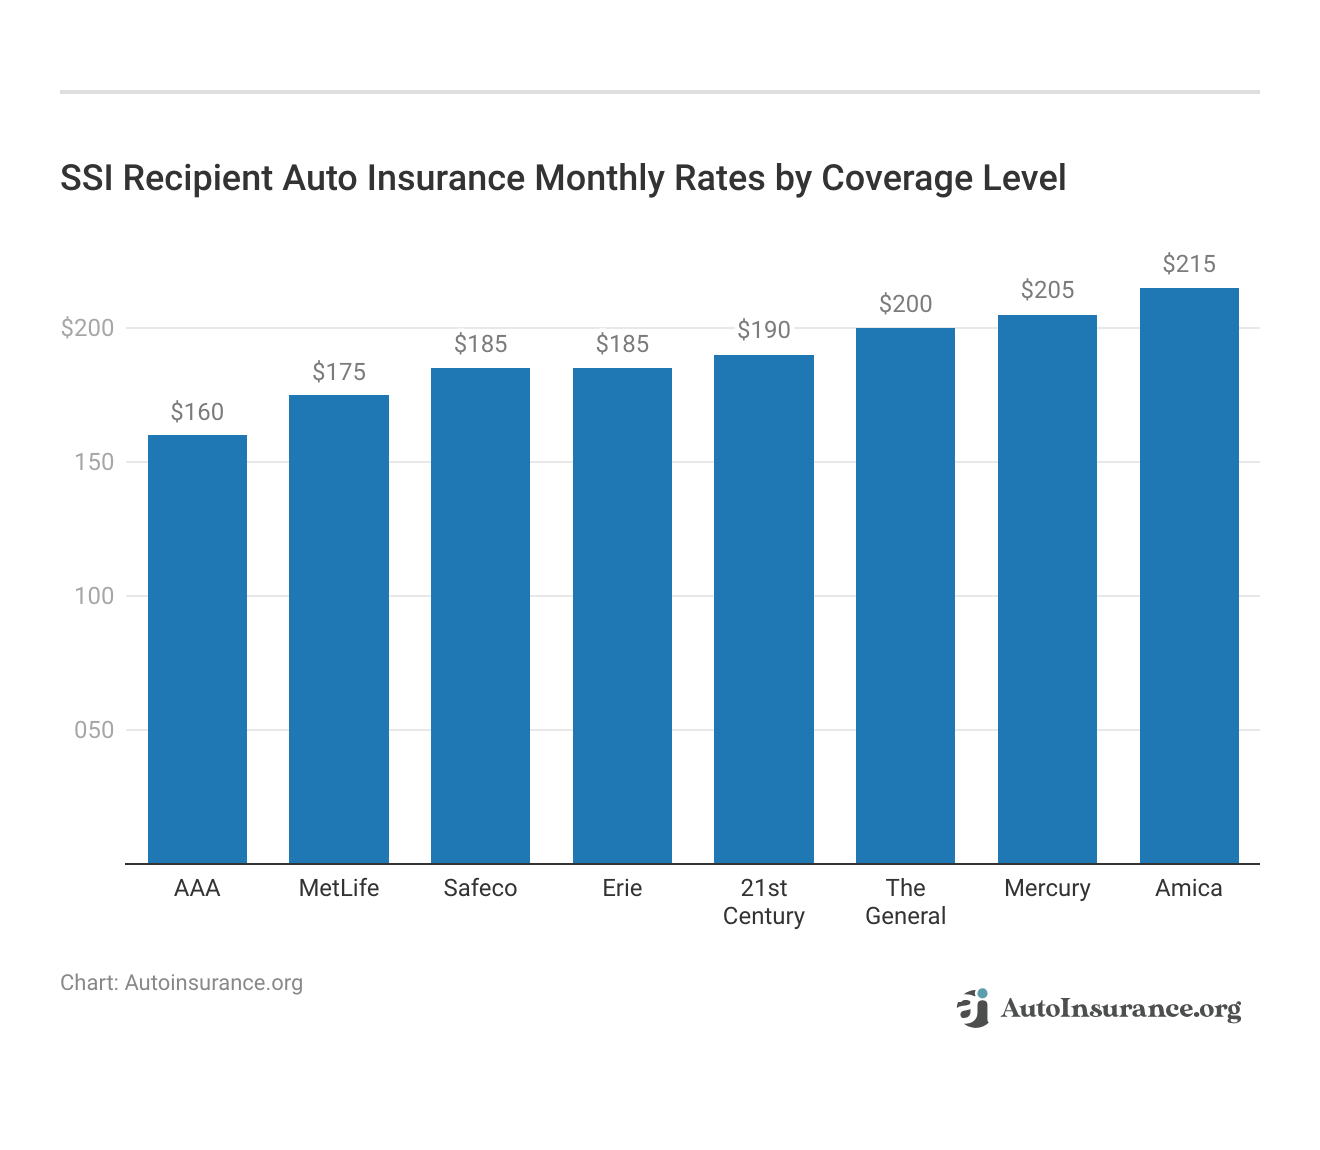 <h3>SSI Recipient Auto Insurance Monthly Rates by Coverage Level</h3>